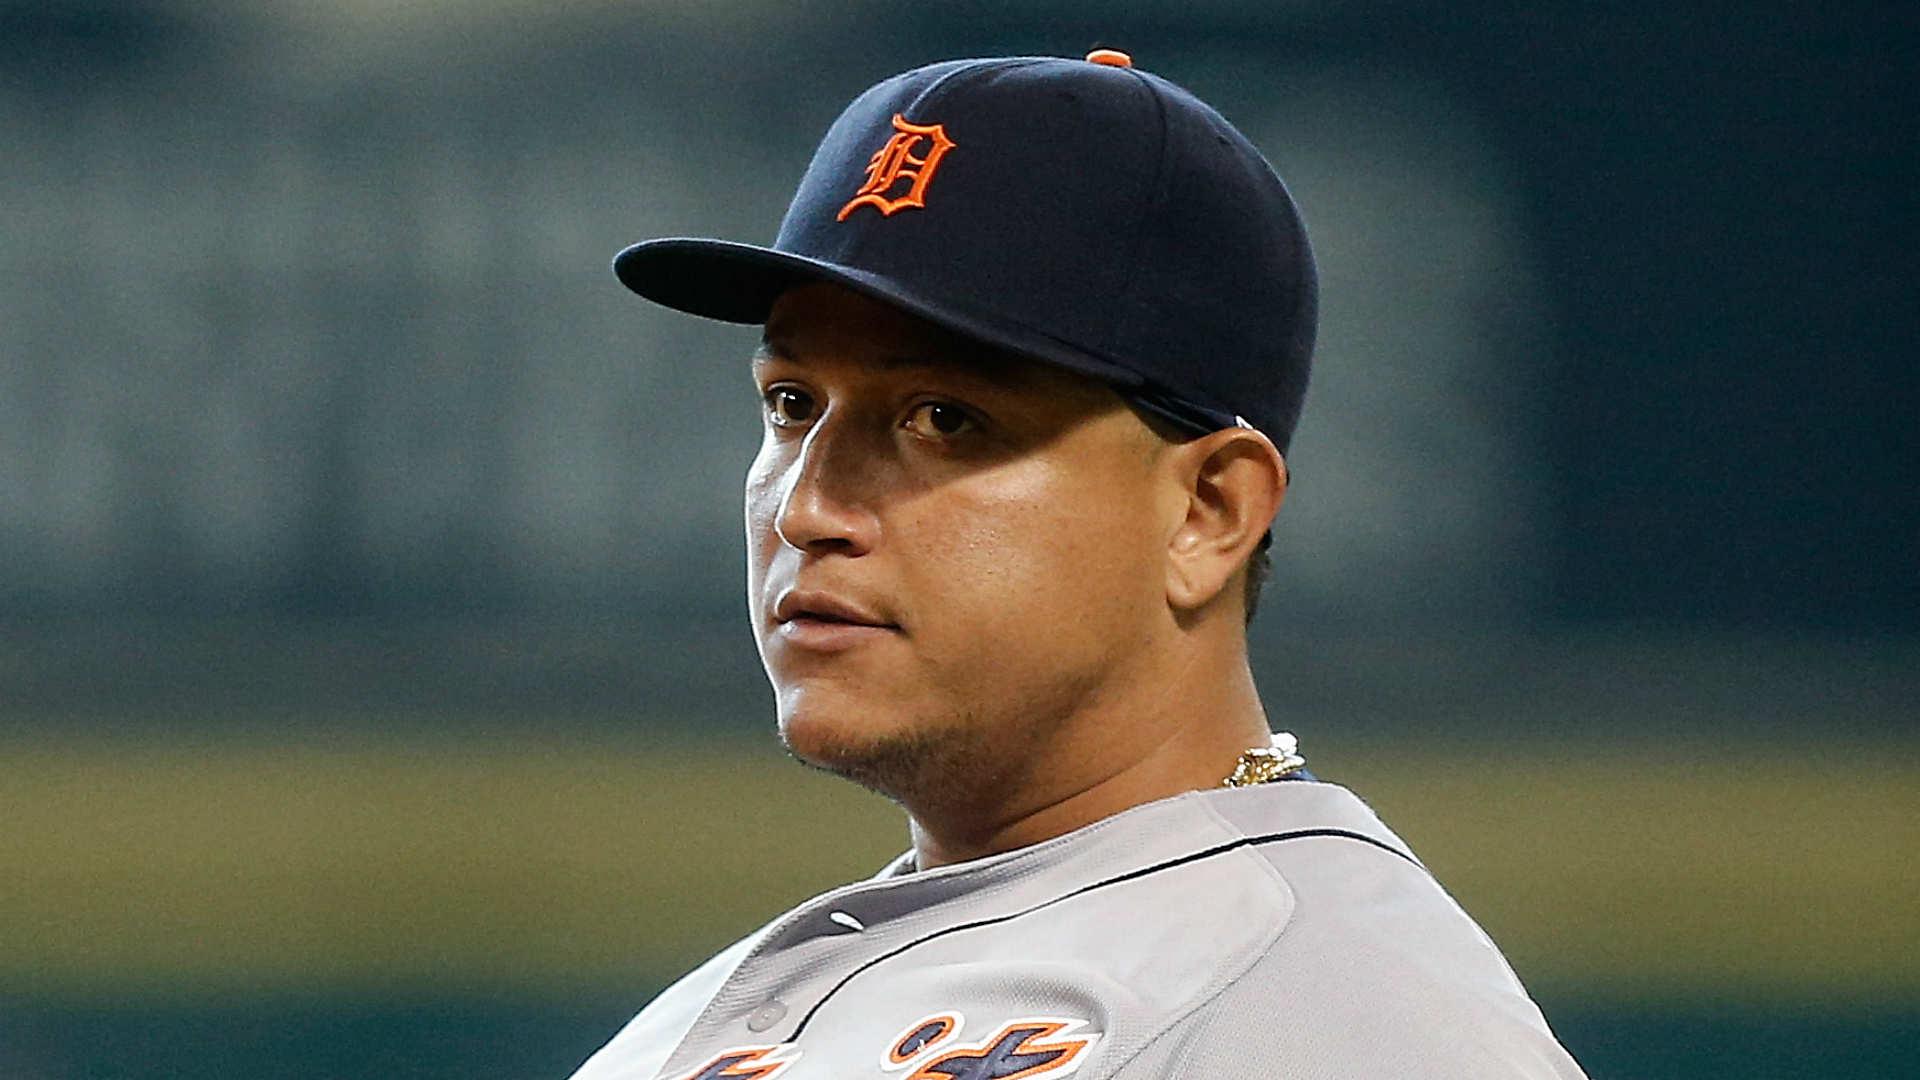 Tigers' Miguel Cabrera won't apologize for lucrative contract. MLB